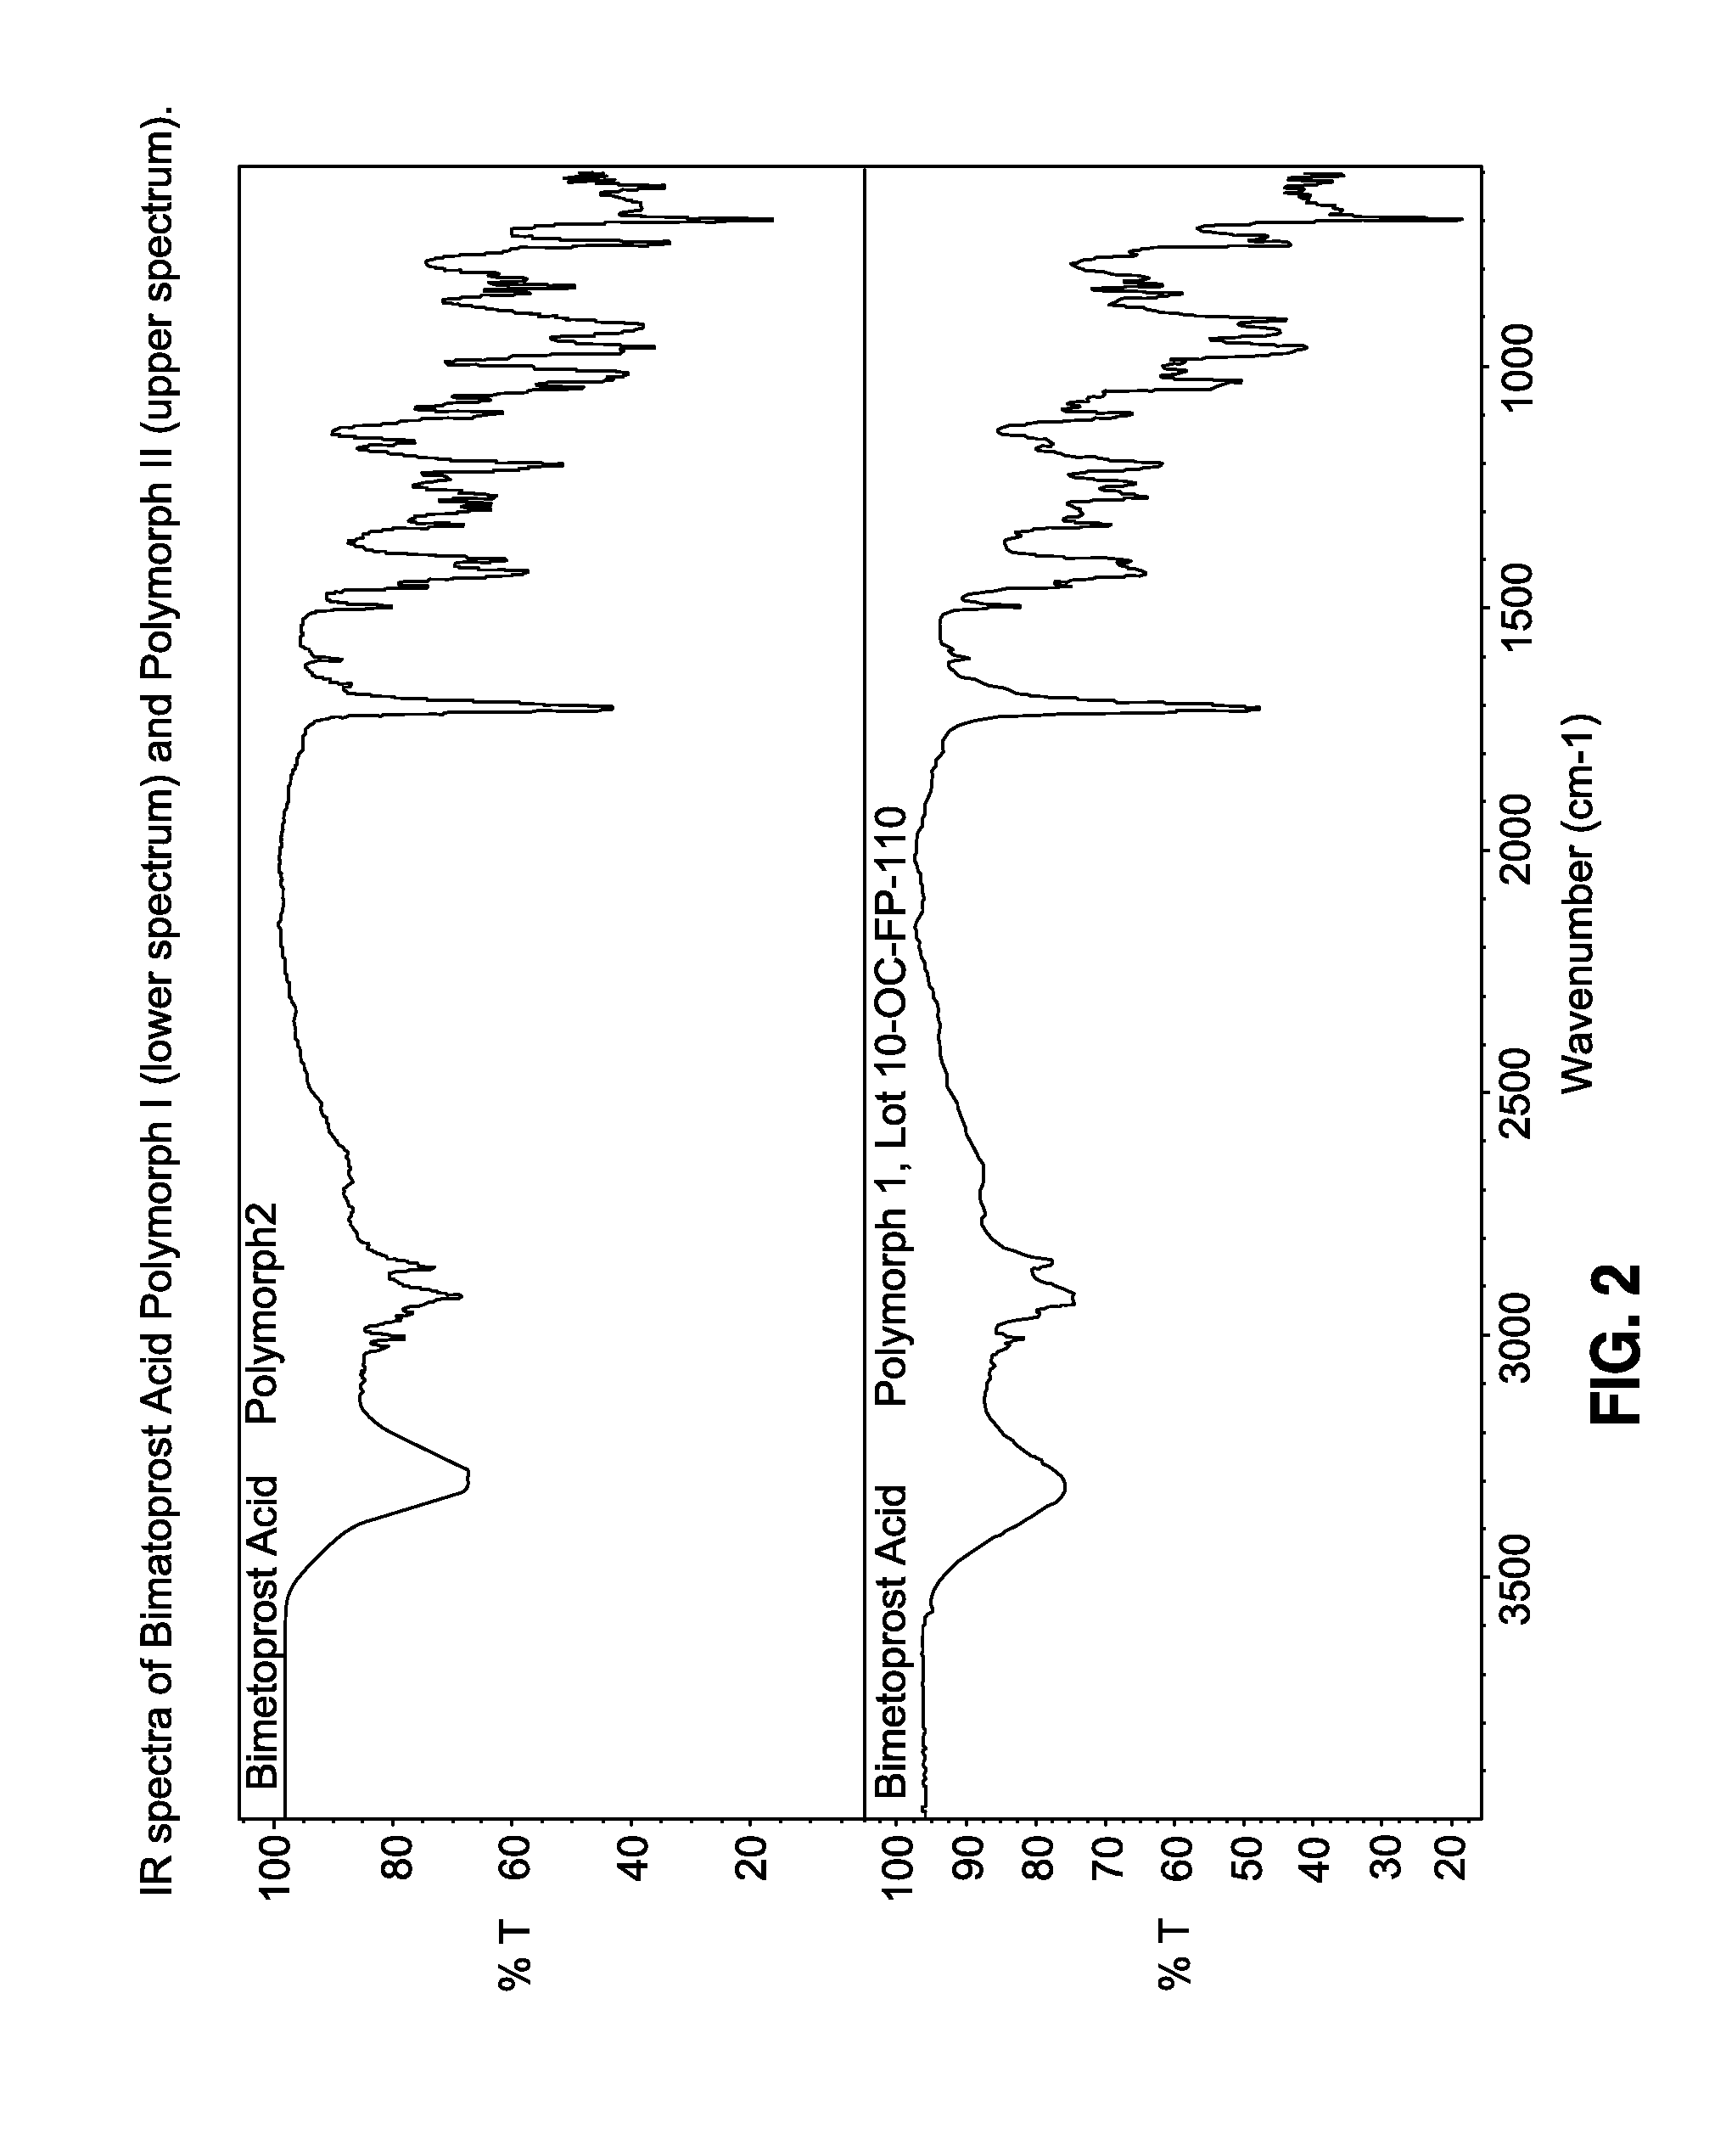 Crystalline forms of bimatoprost acid, methods for preparation, and methods for use thereof